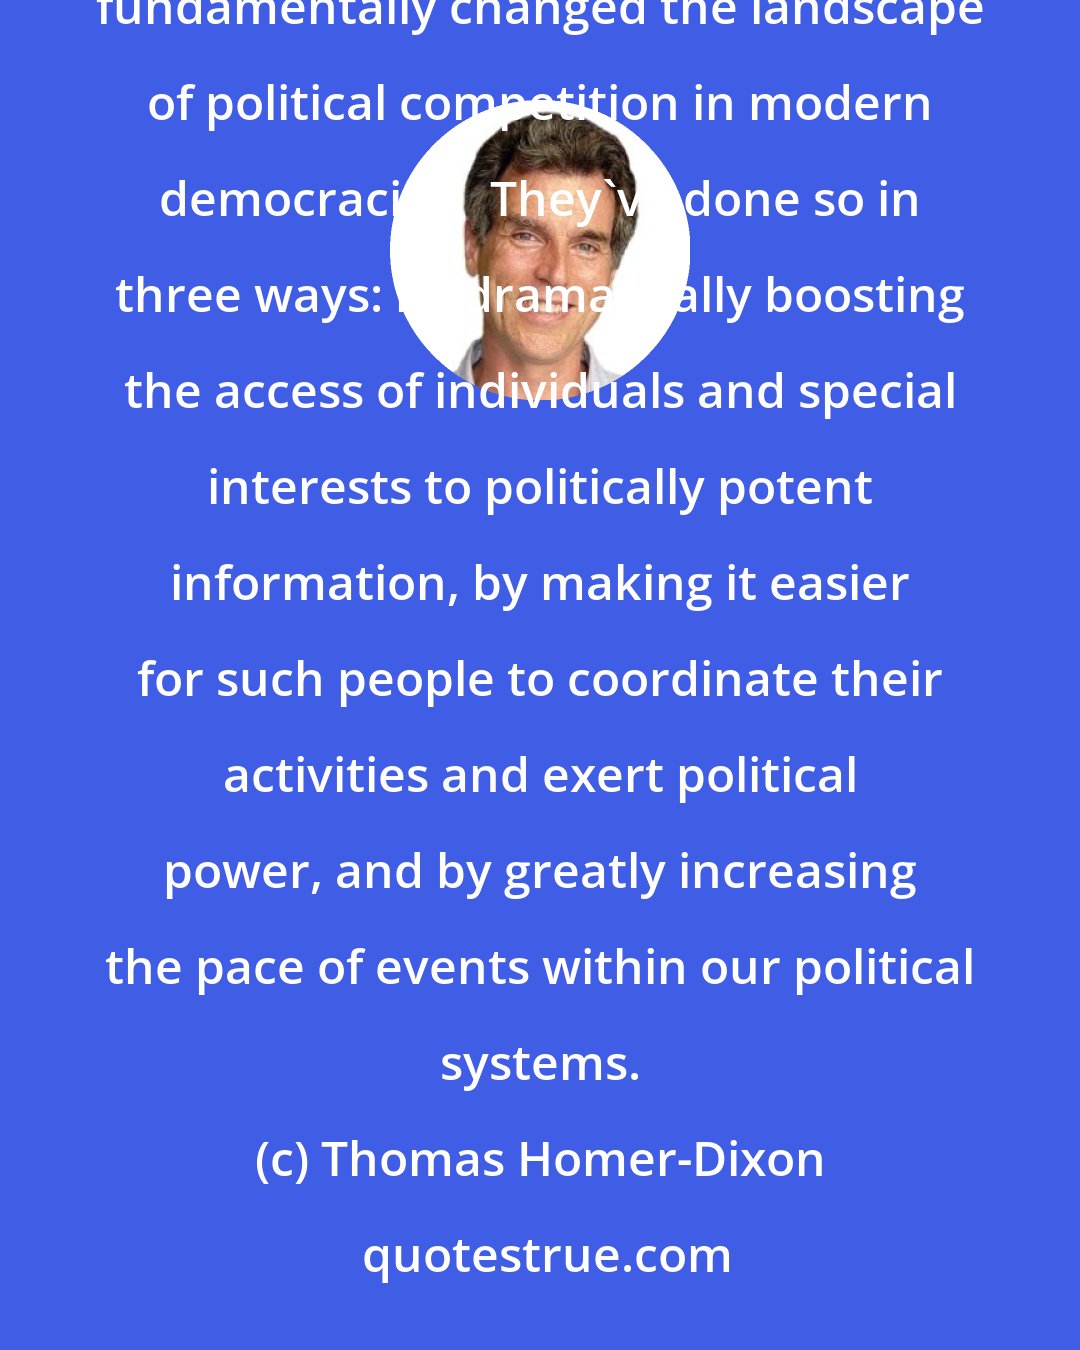 Thomas Homer-Dixon: New information technologies-including email, the web, and computerized blast-faxes and phone calls-have fundamentally changed the landscape of political competition in modern democracies.  They've done so in three ways: by dramatically boosting the access of individuals and special interests to politically potent information, by making it easier for such people to coordinate their activities and exert political power, and by greatly increasing the pace of events within our political systems.